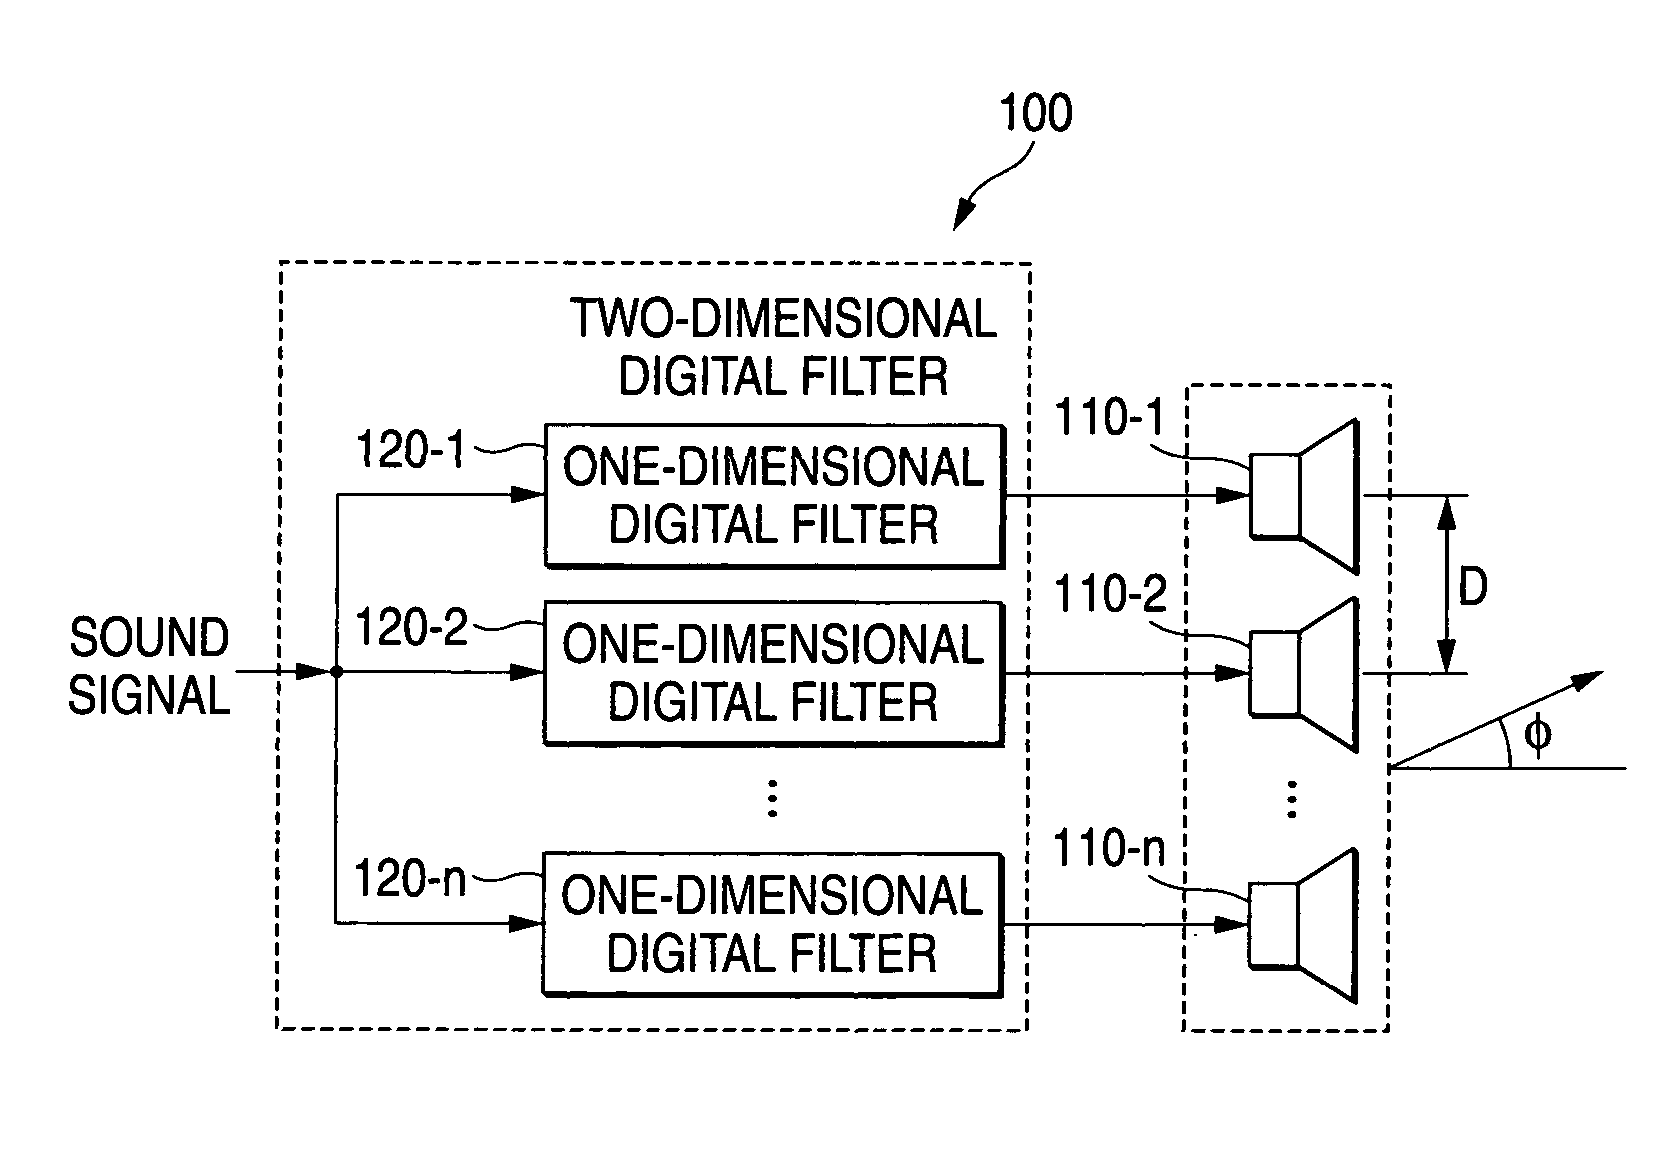 Speaker array and microphone array